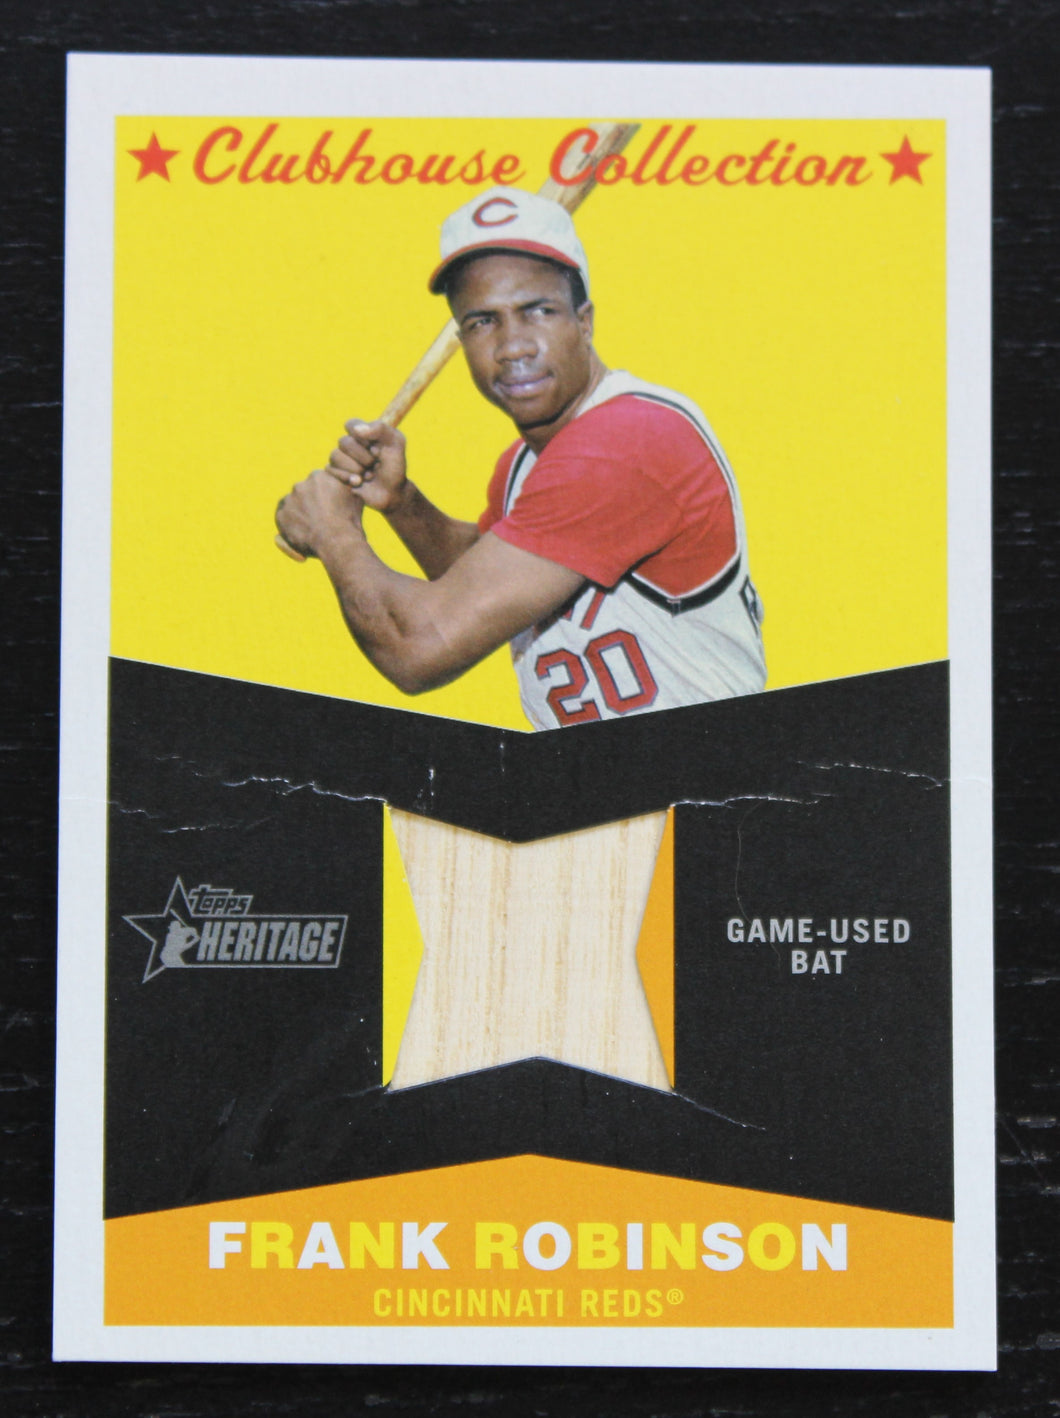 2009 Topps Heritage Clubhouse Collection Frank Robinson Relic Card